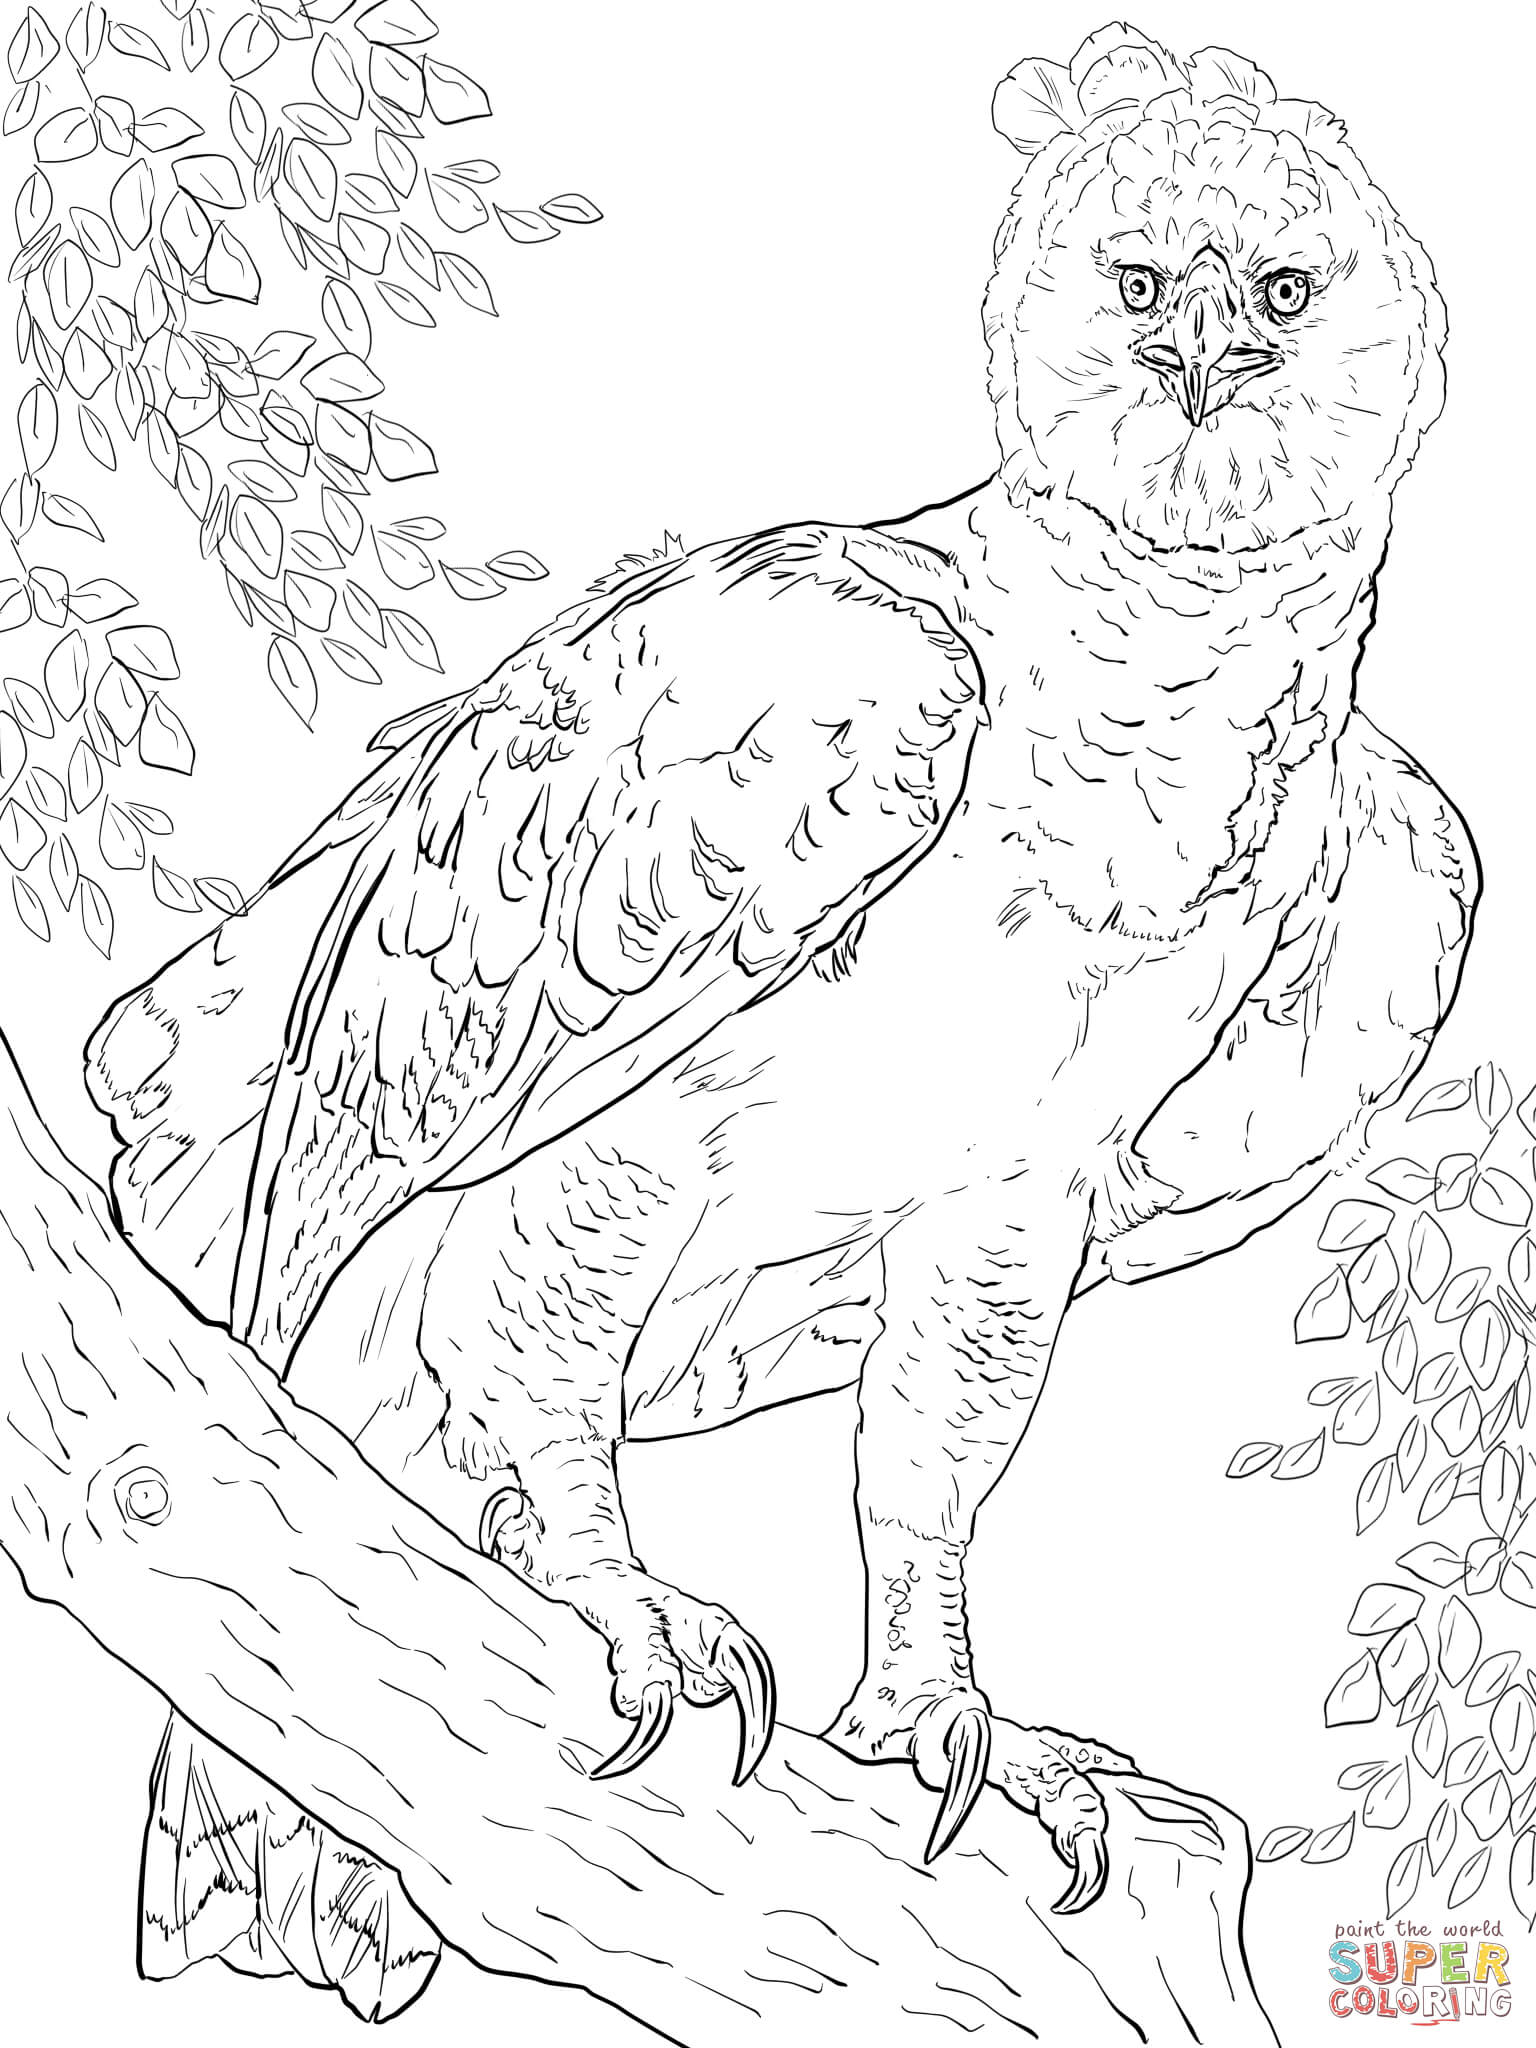 Harpy Eagle coloring #10, Download drawings